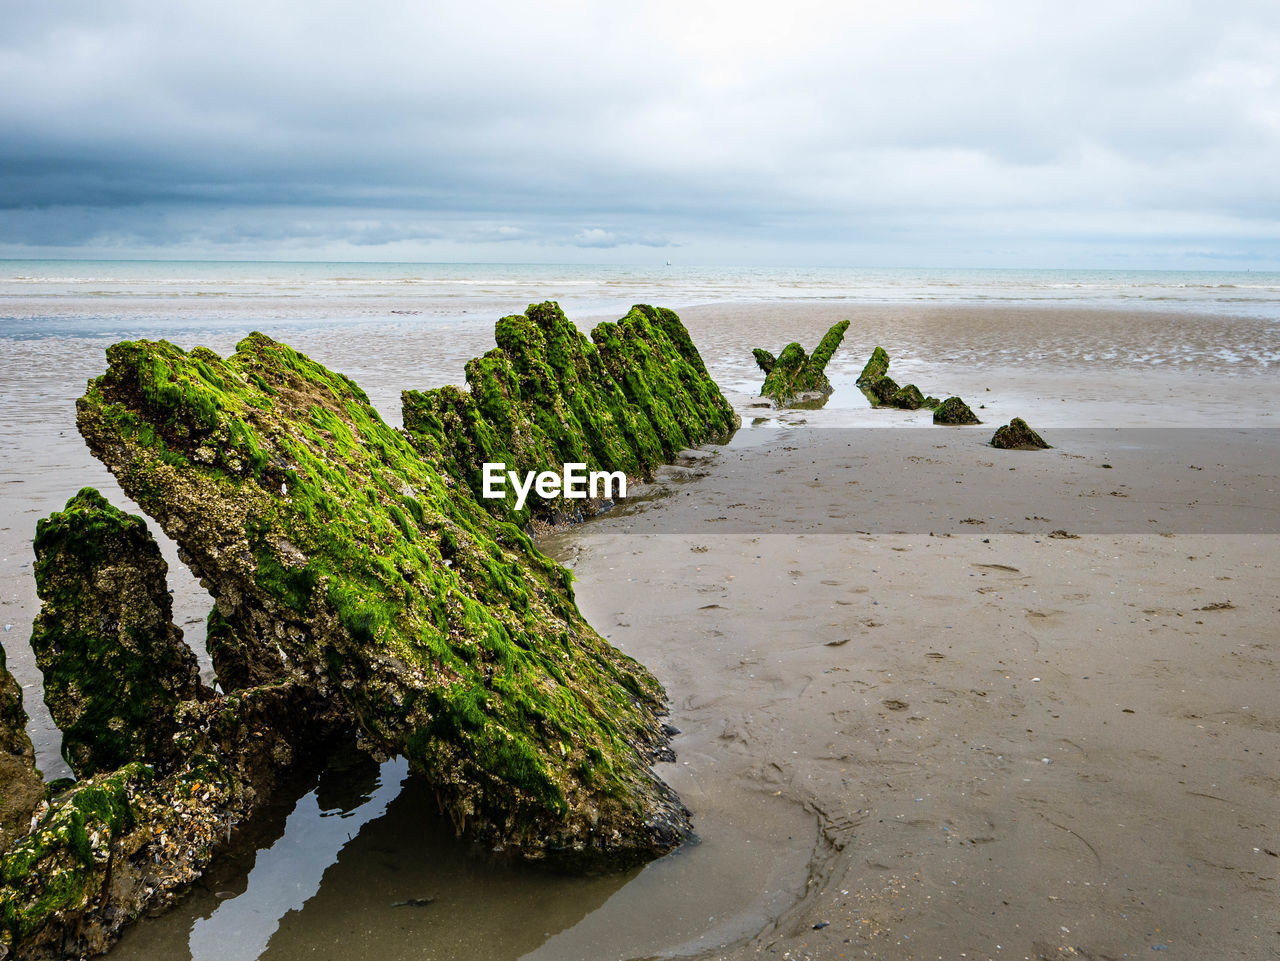 Algae covered remains of a world war ship at a beach in northern france